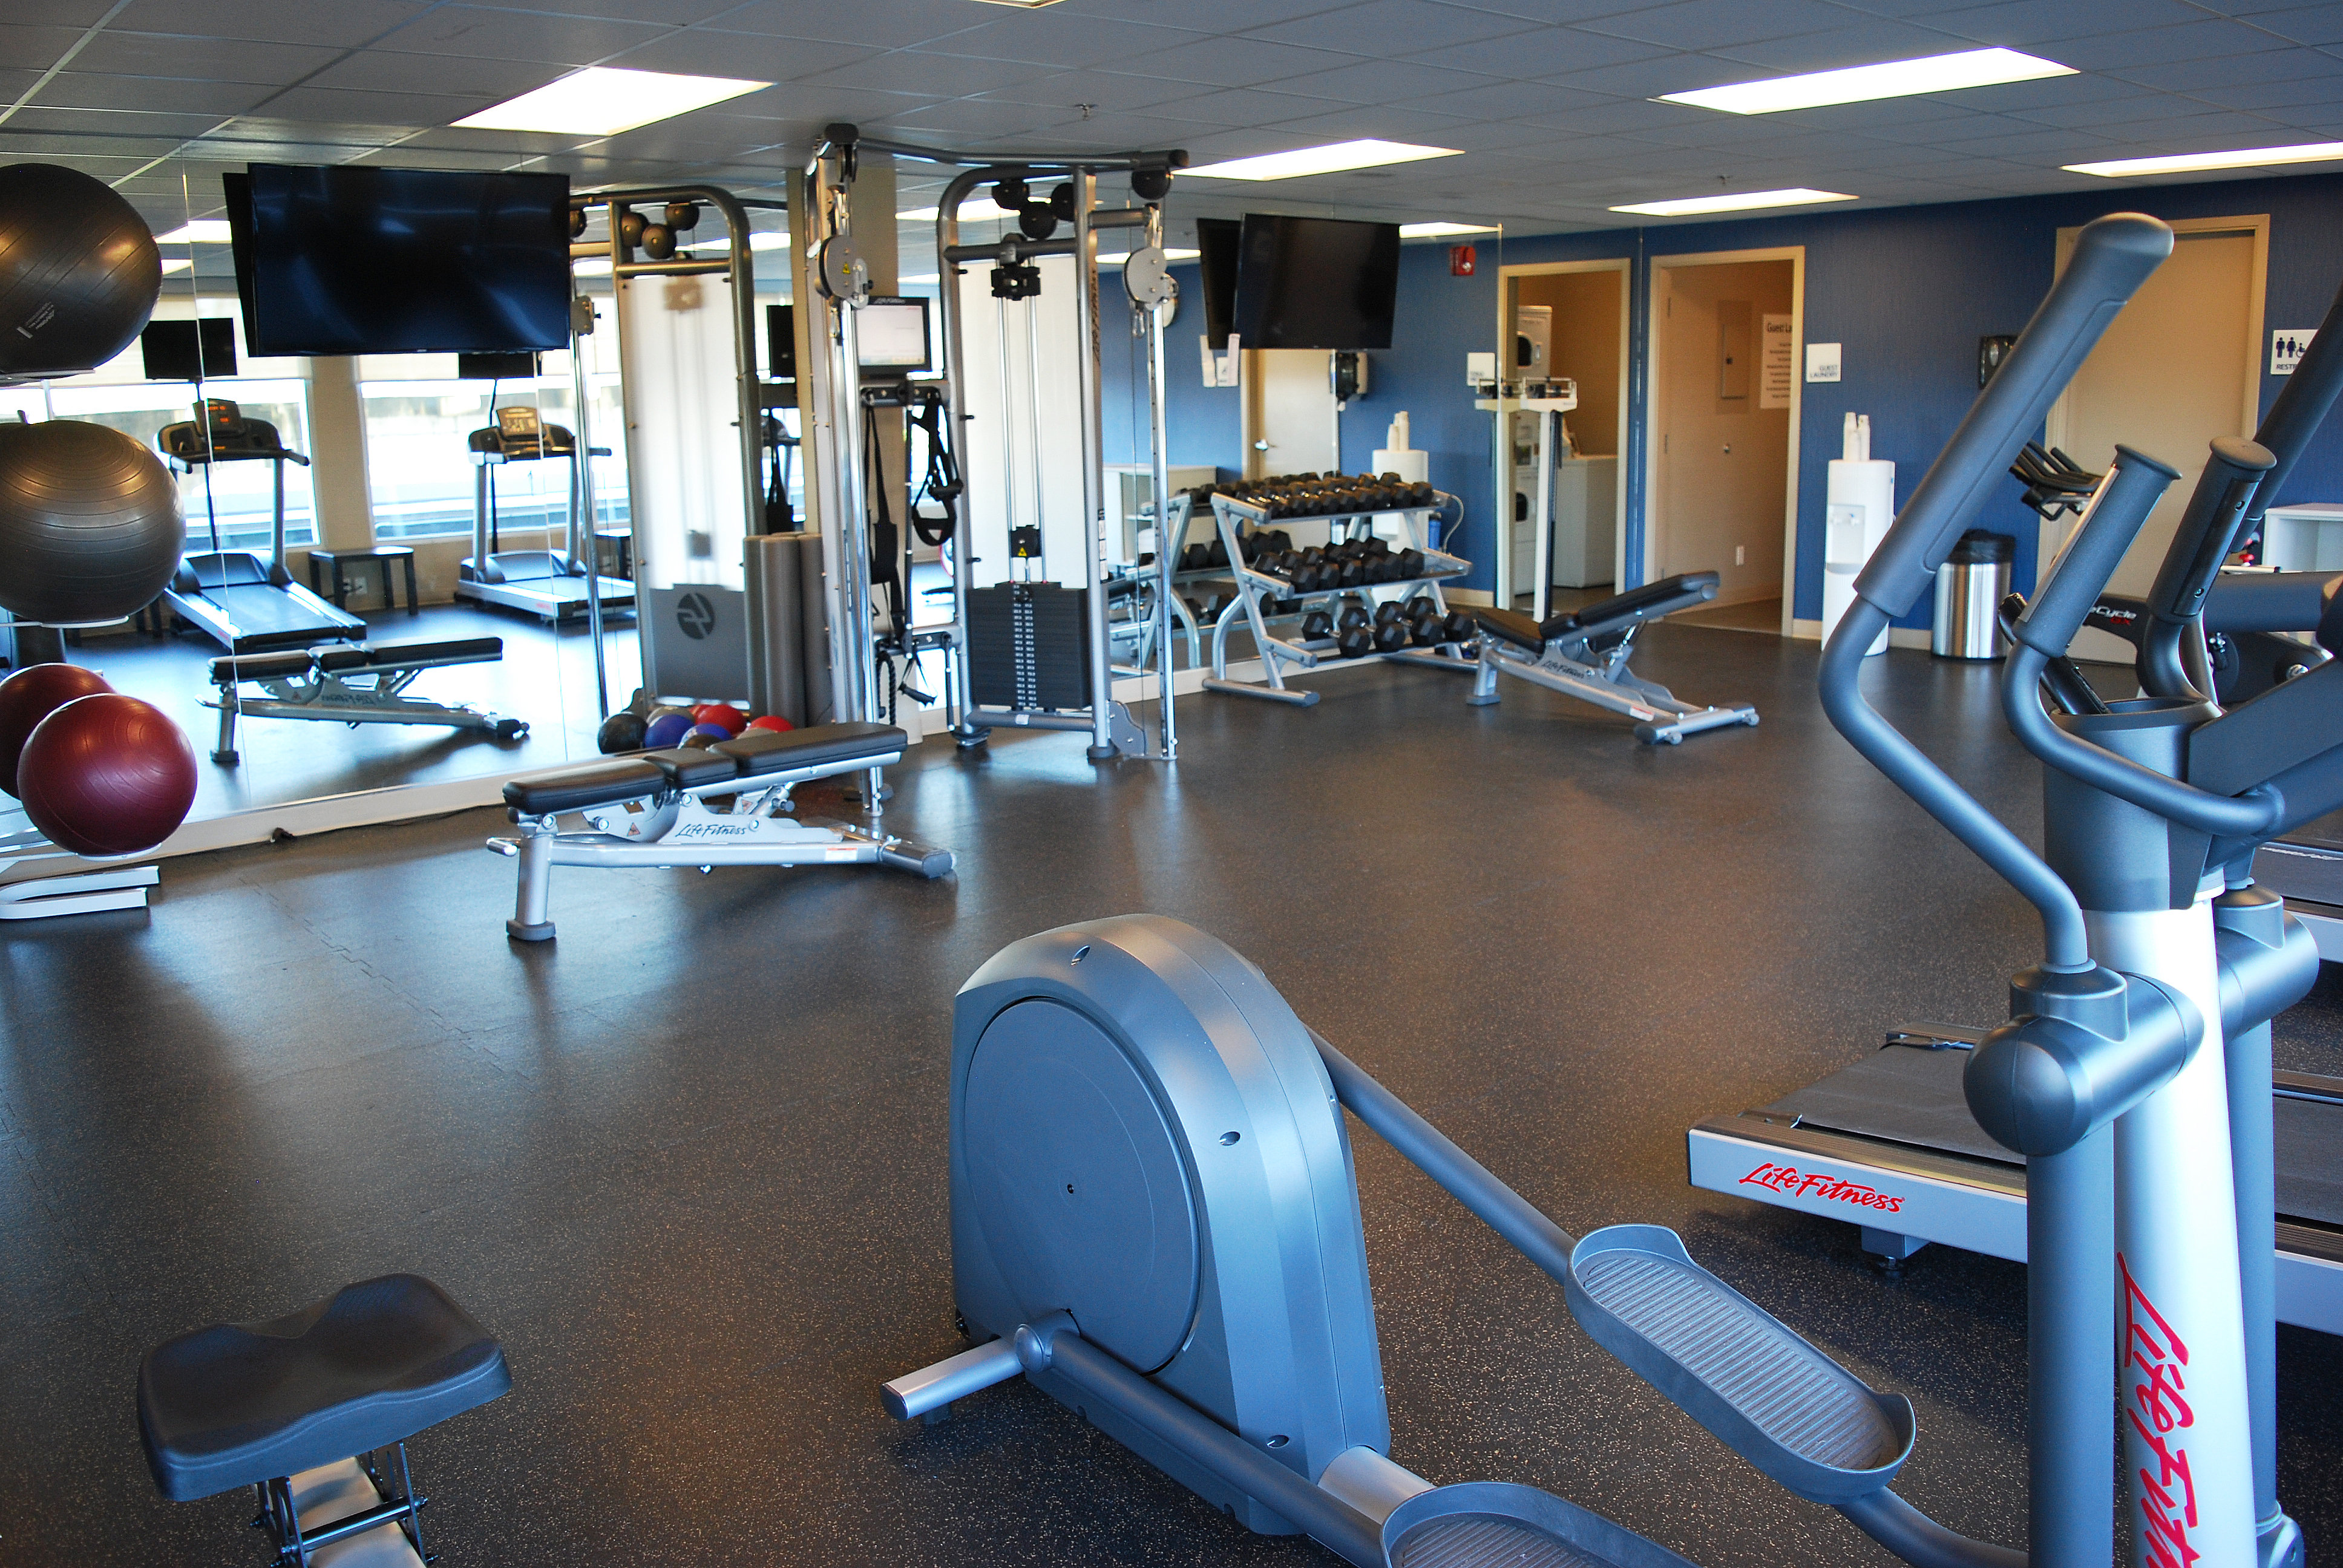 Stay connected to your wellness goals in our Fitness Center.